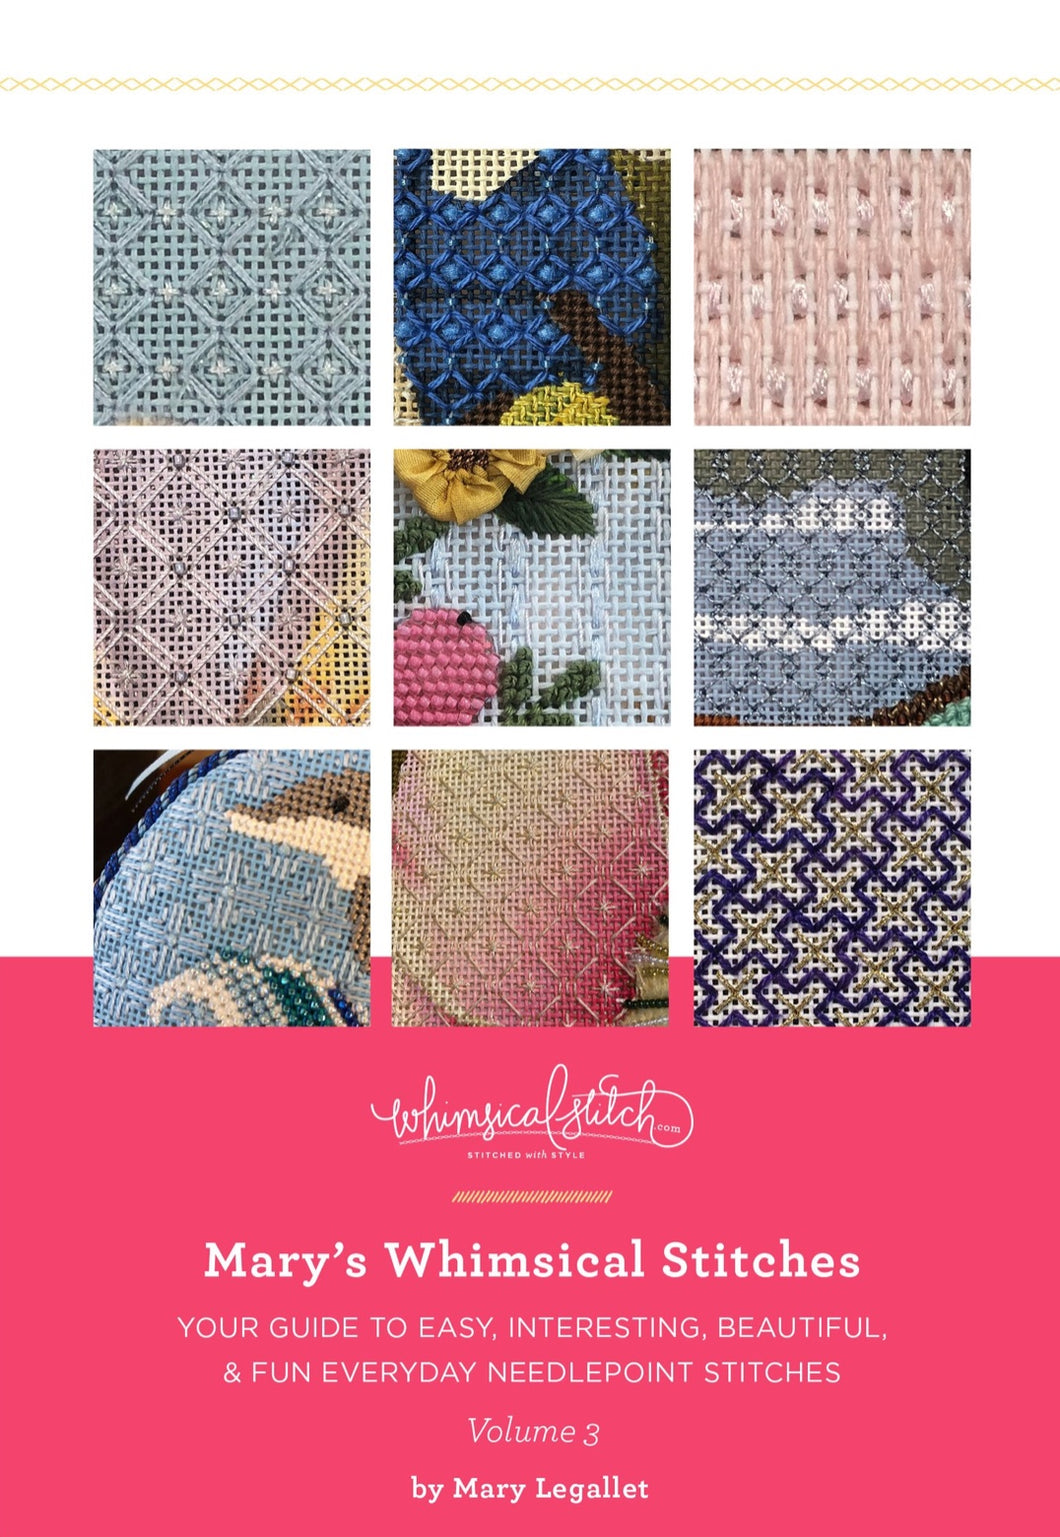 Mary’s Whimsical Stitches vol 3